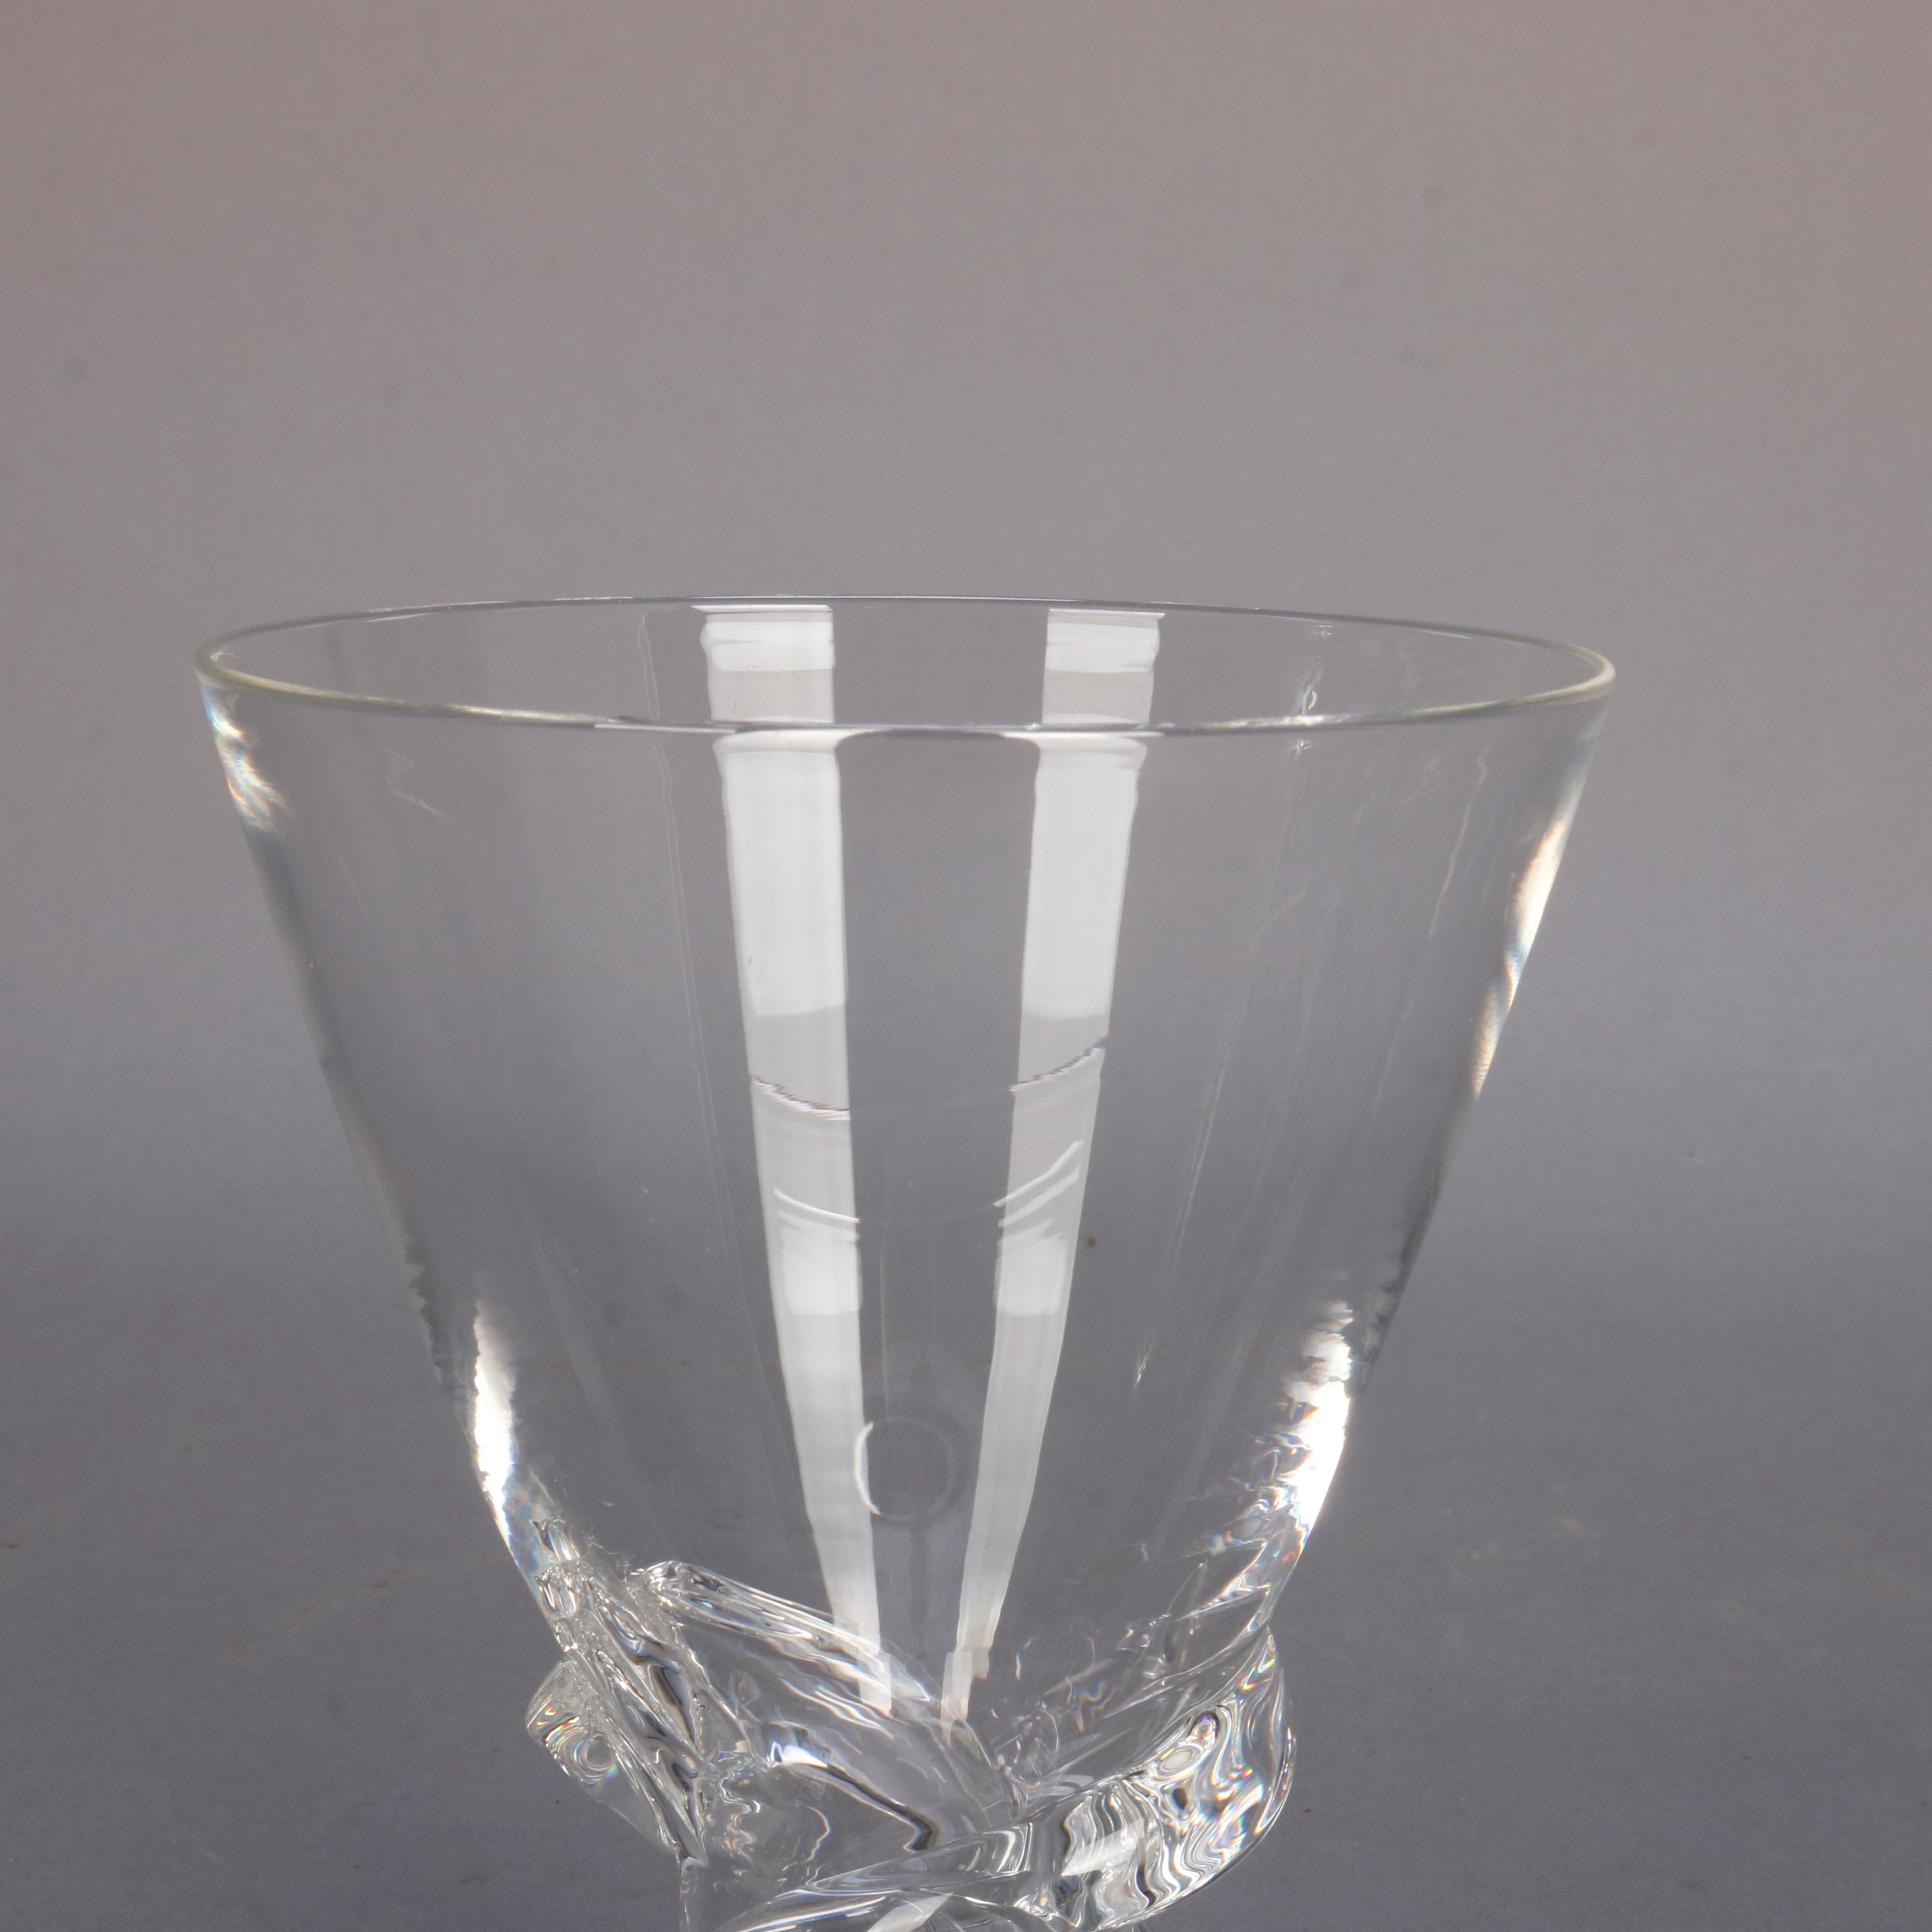 American Mid-Century Modern Steuben Glass Works Signed Crystal Twist Vase with Box